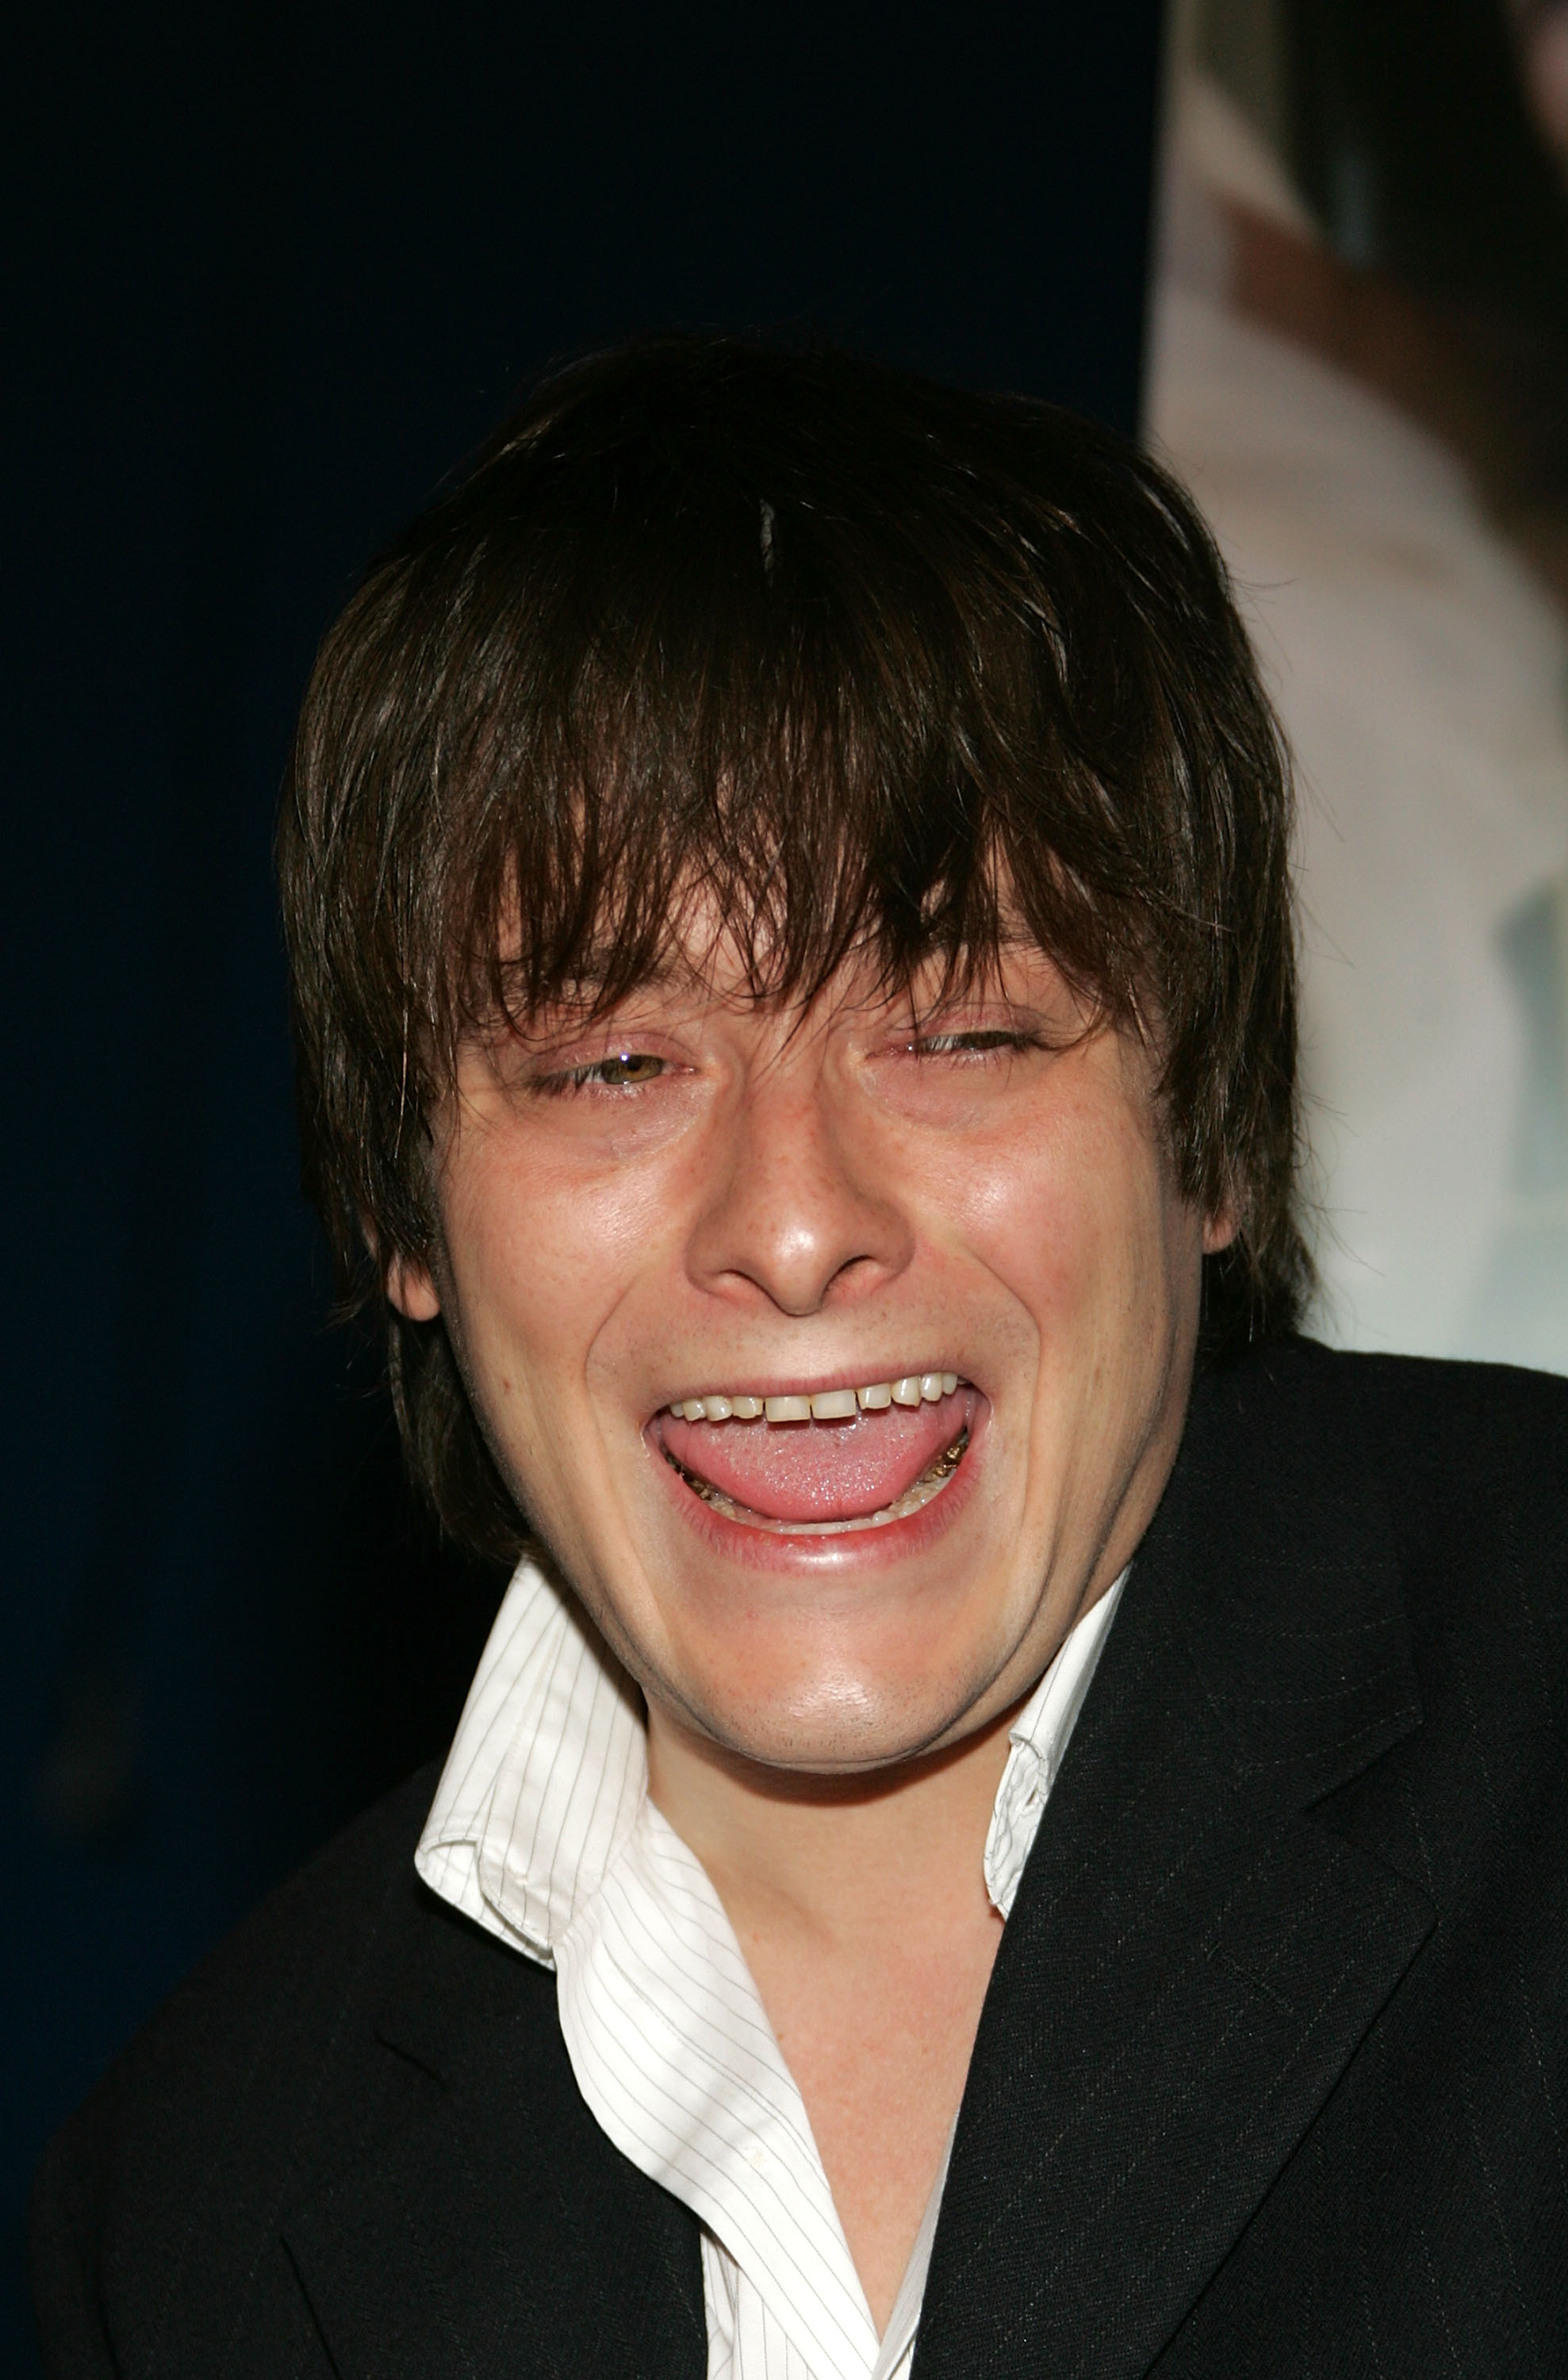 Edward Furlong at the world premiere screening of "Cruel World" on October 12, 2005, in Universal City, California | Source: Getty Images